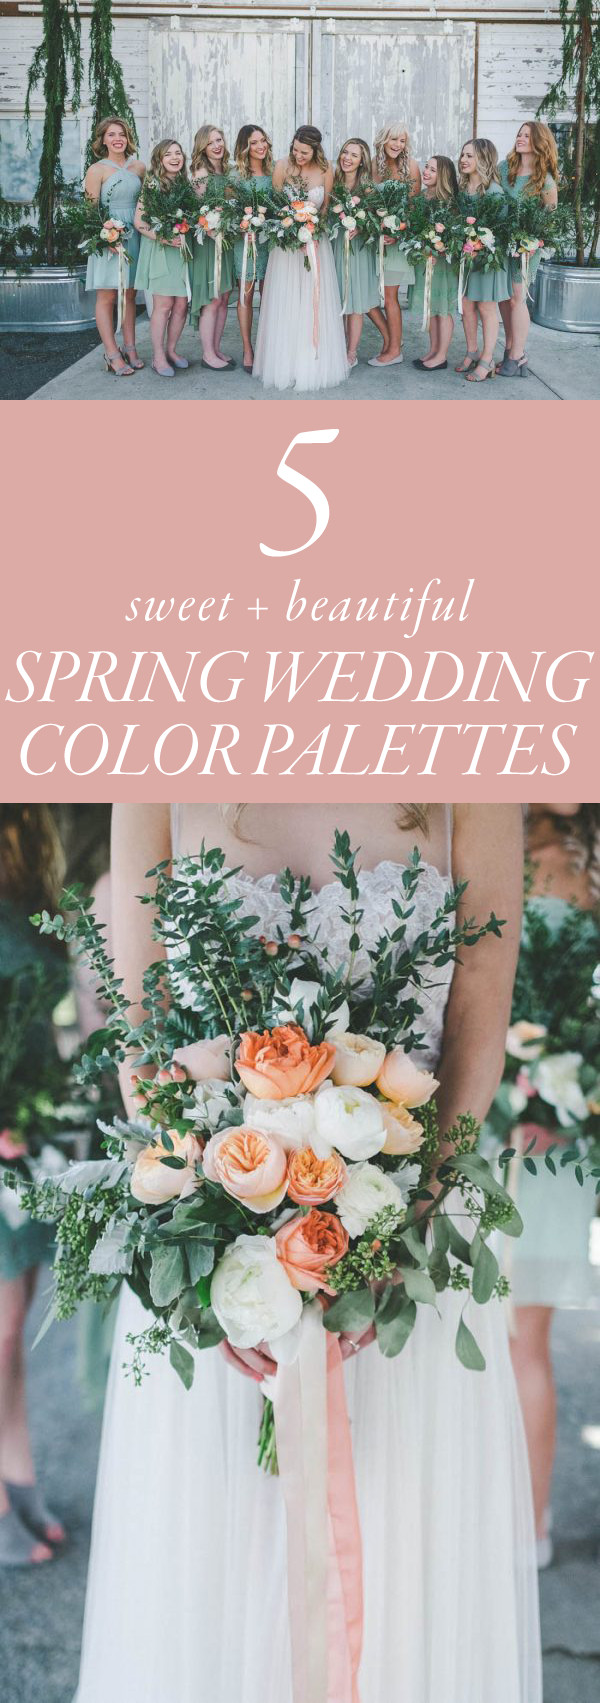 Wedding Color Ideas For Spring
 5 Sweet Spring Wedding Color Palette Ideas Weddings